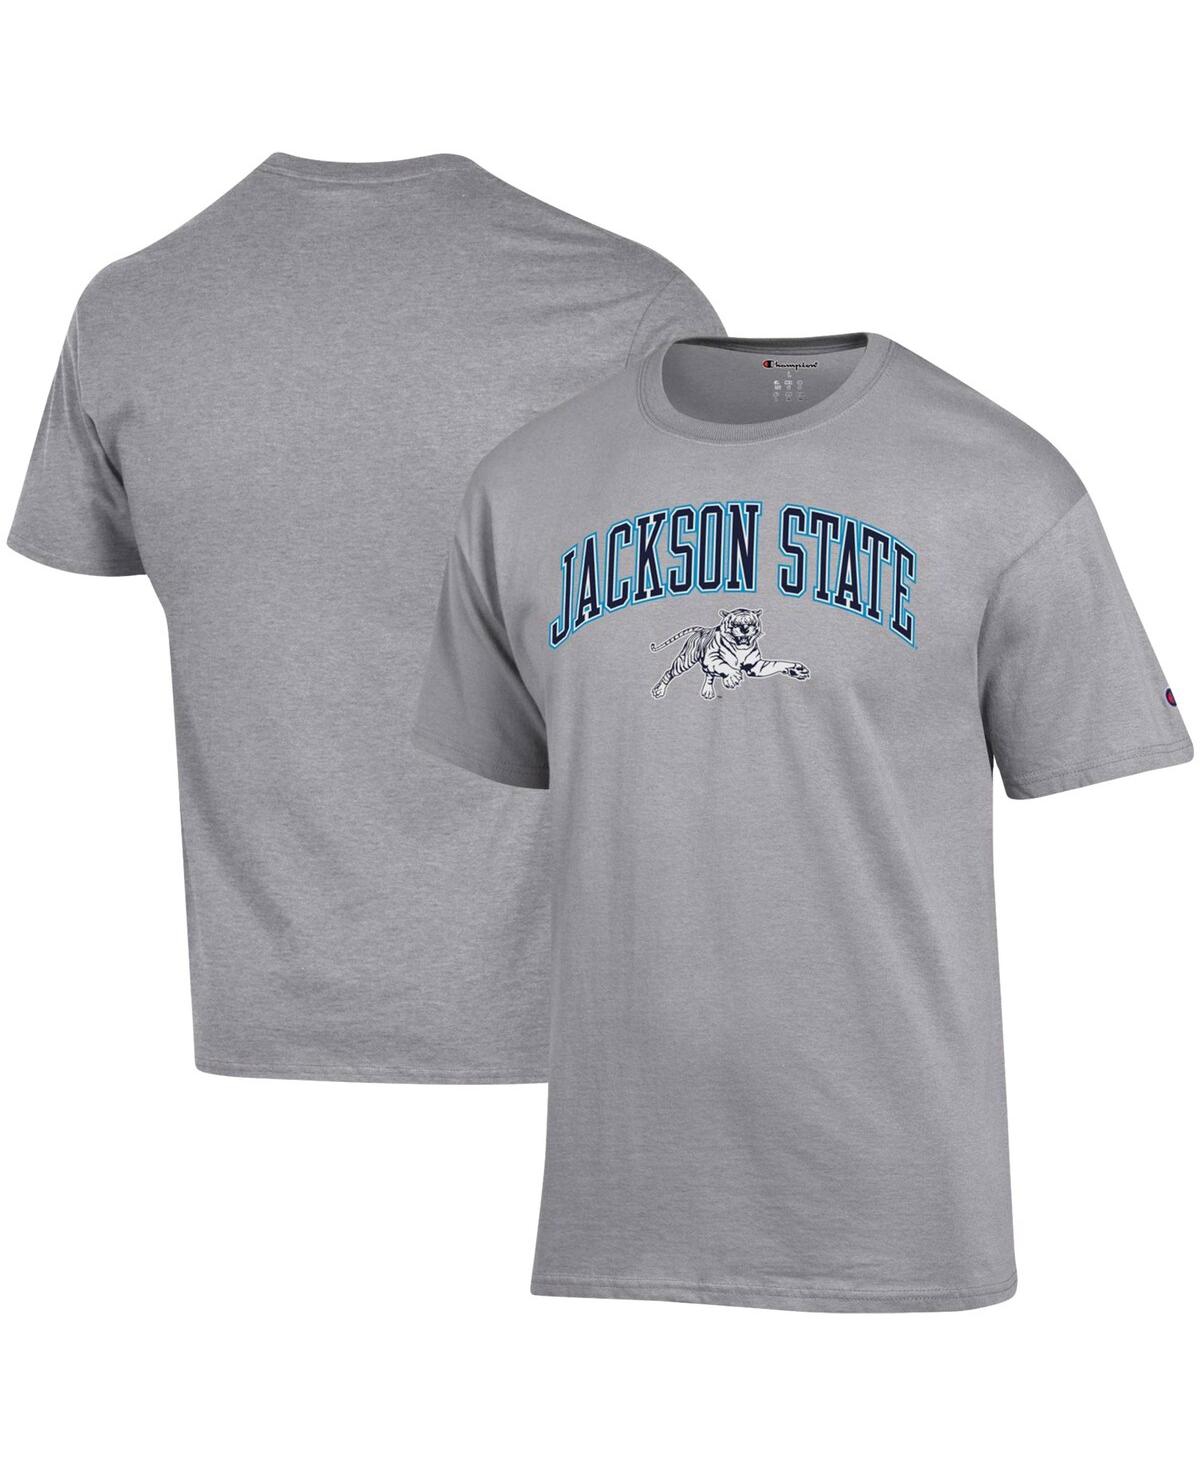 Champion Men's  Gray Jackson State Tigers Arch Over Logo T-shirt